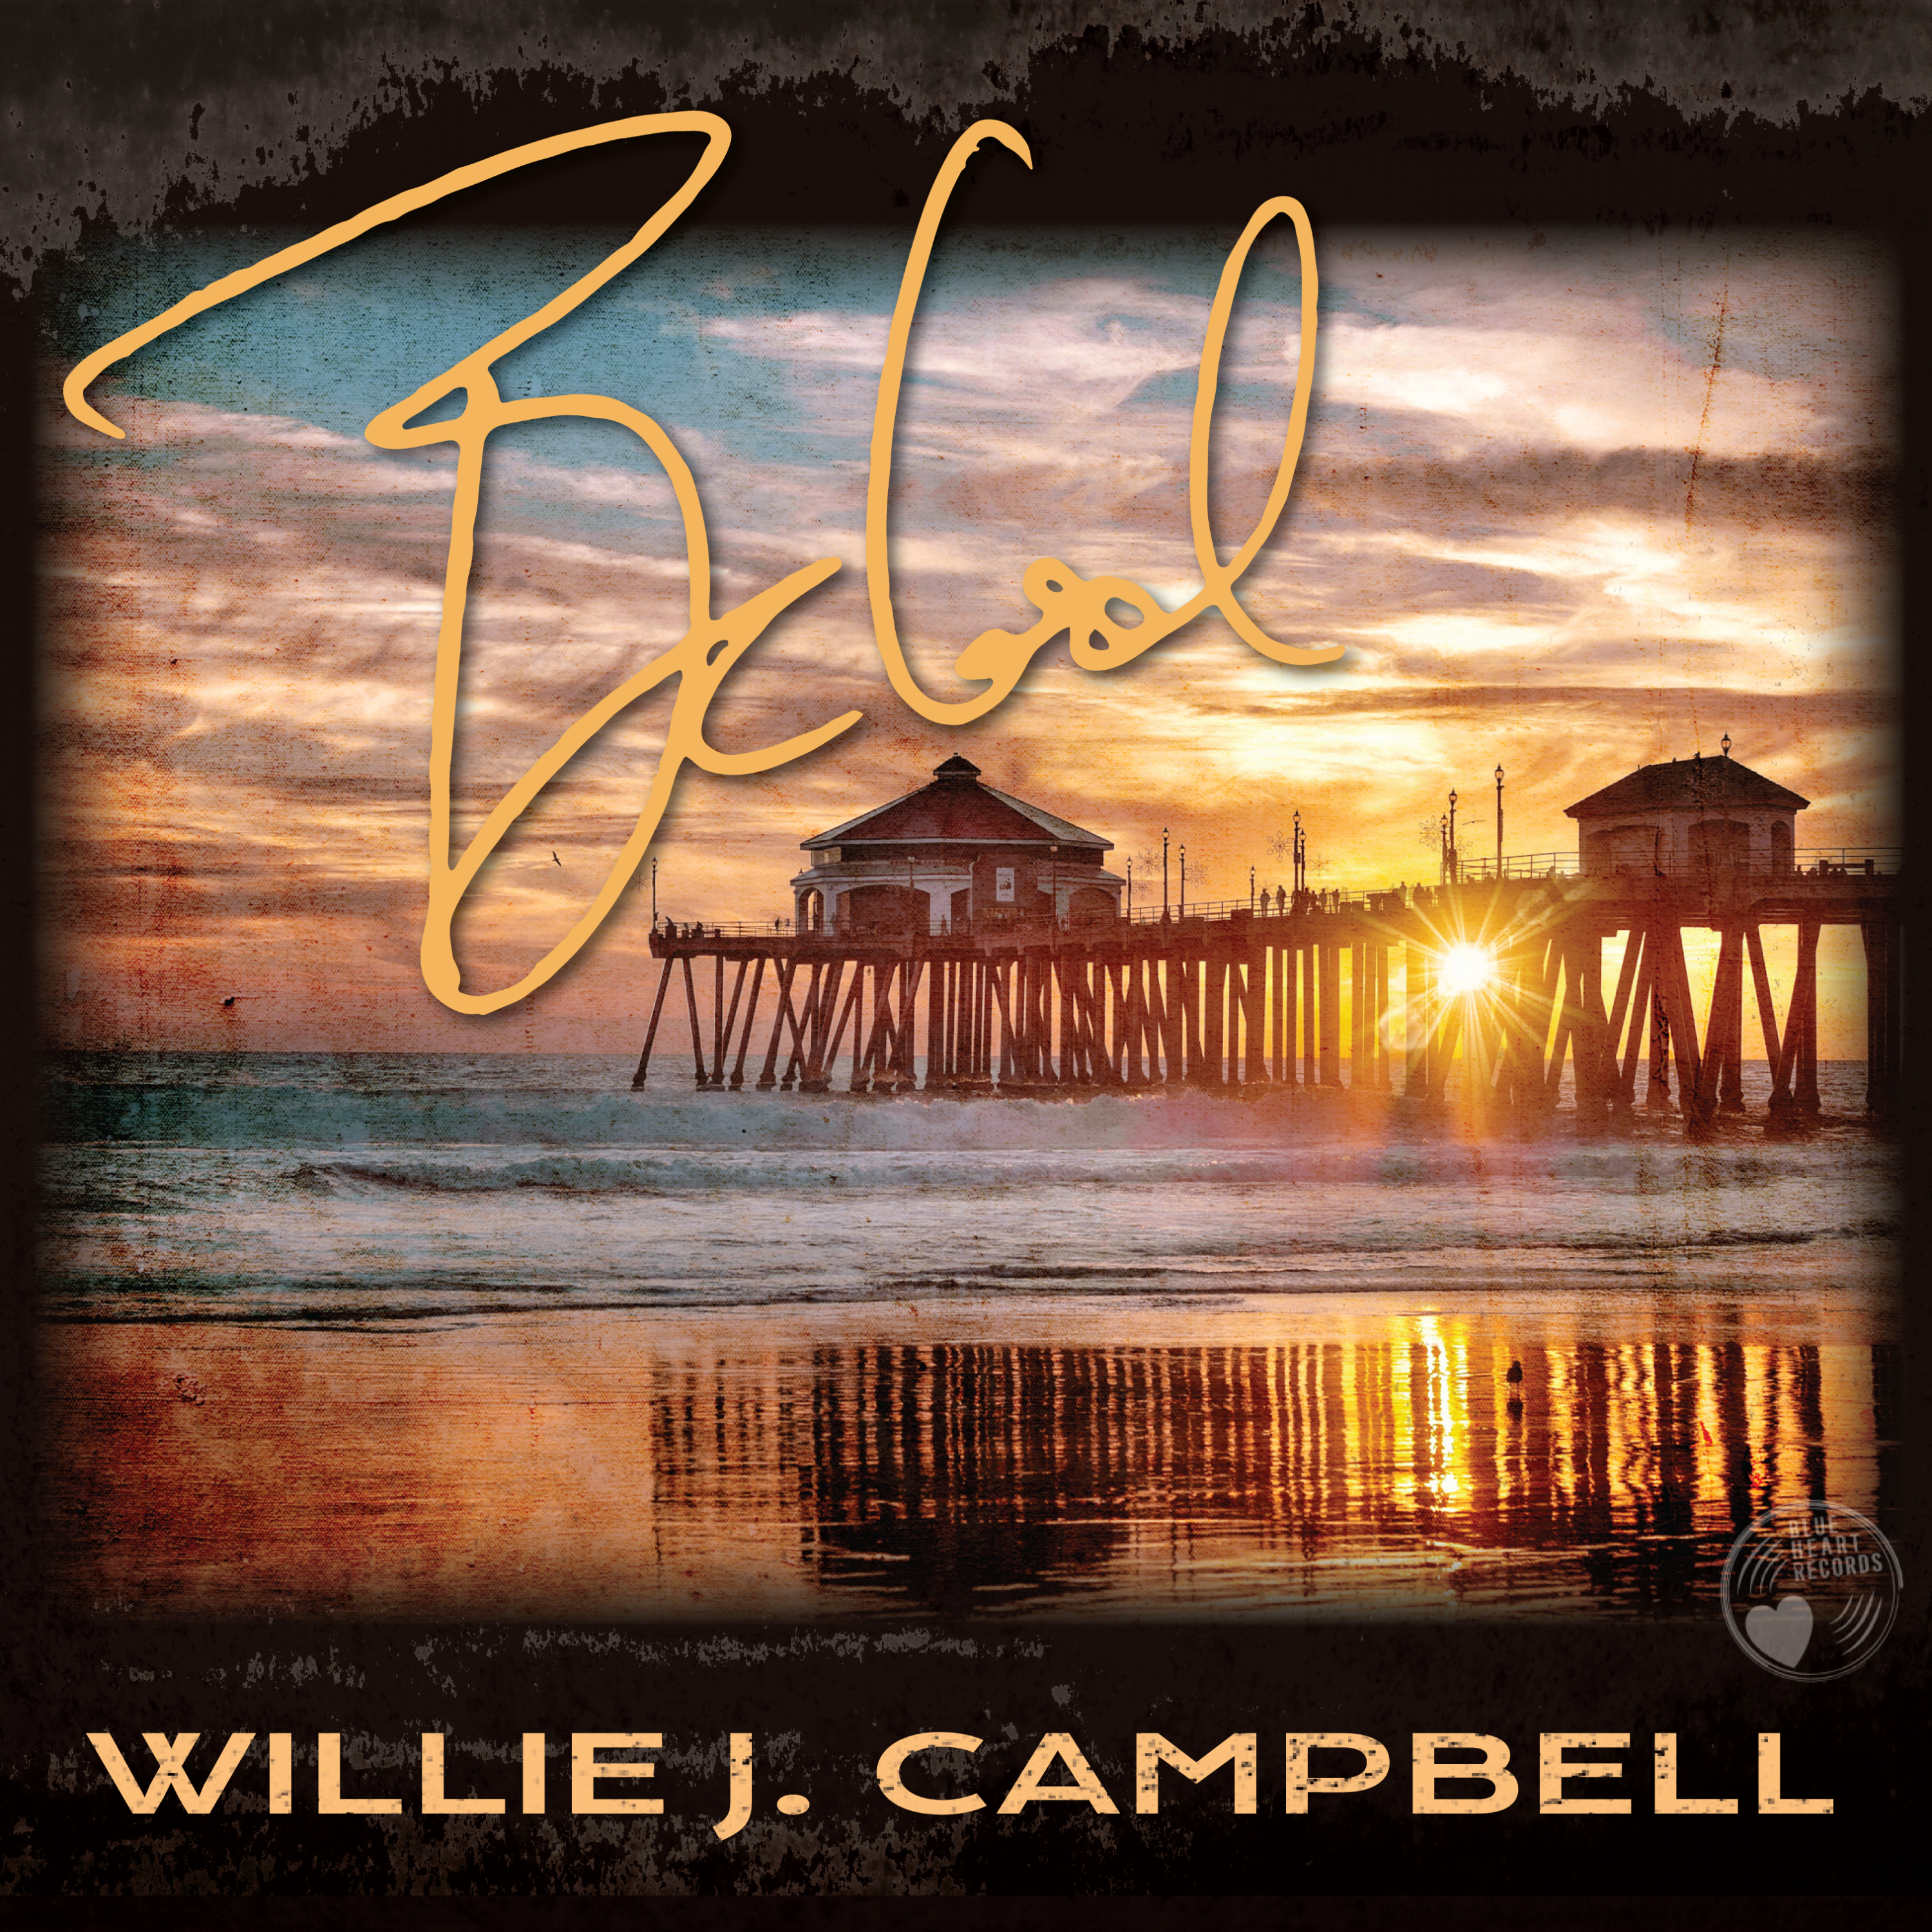 Art for 03_ThisTime_WillieJCampbell_BeCool by Willie J. Campbell